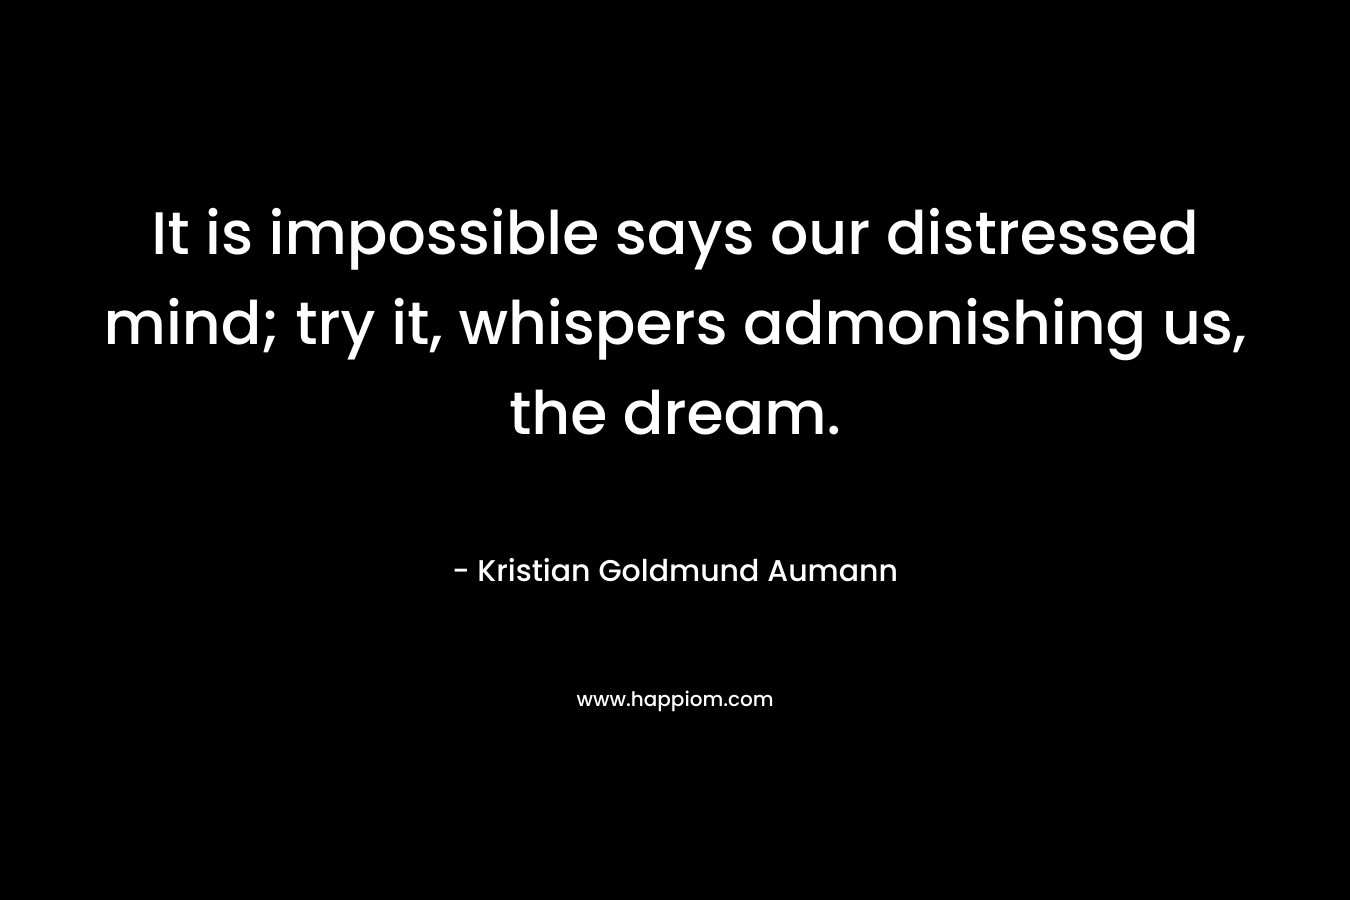 It is impossible says our distressed mind; try it, whispers admonishing us, the dream. – Kristian Goldmund Aumann